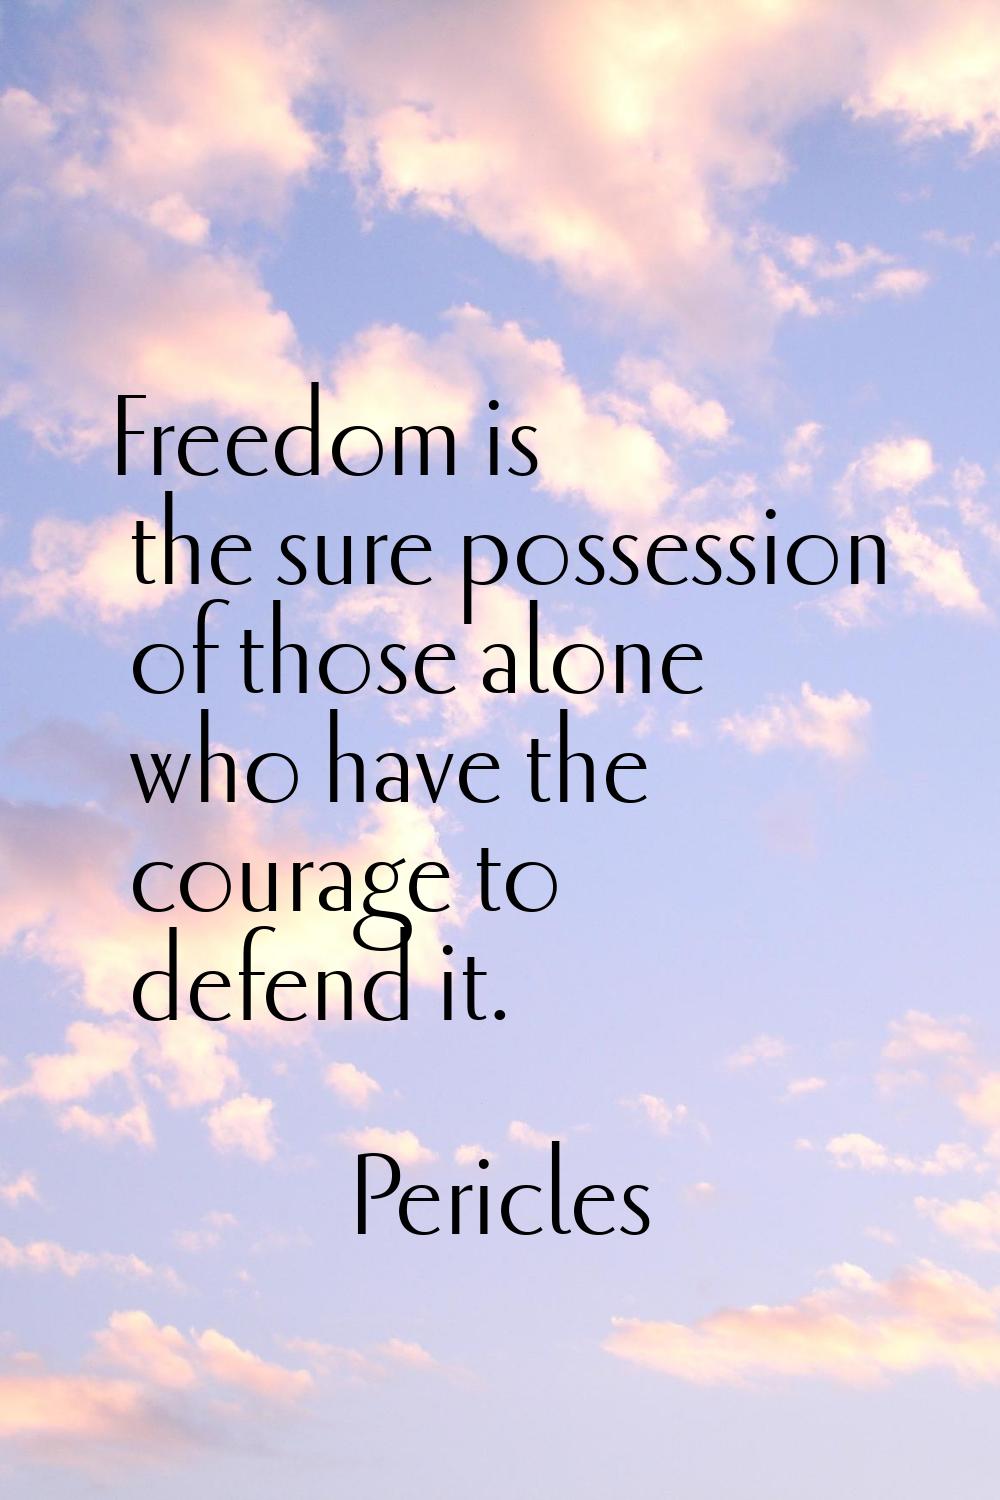 Freedom is the sure possession of those alone who have the courage to defend it.